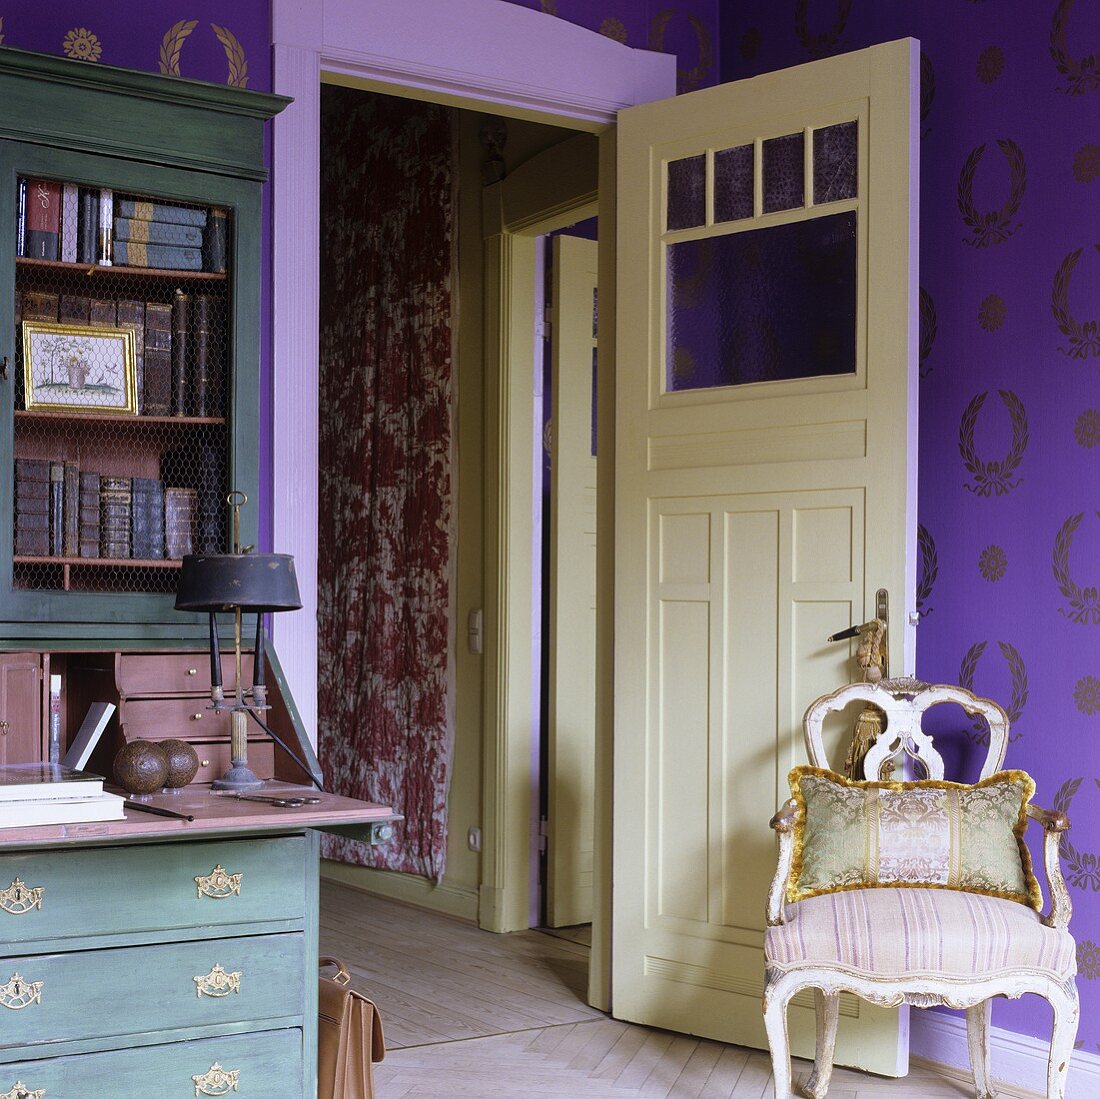 An antique Rococo-style chair in front of an open door with a view into a hallway